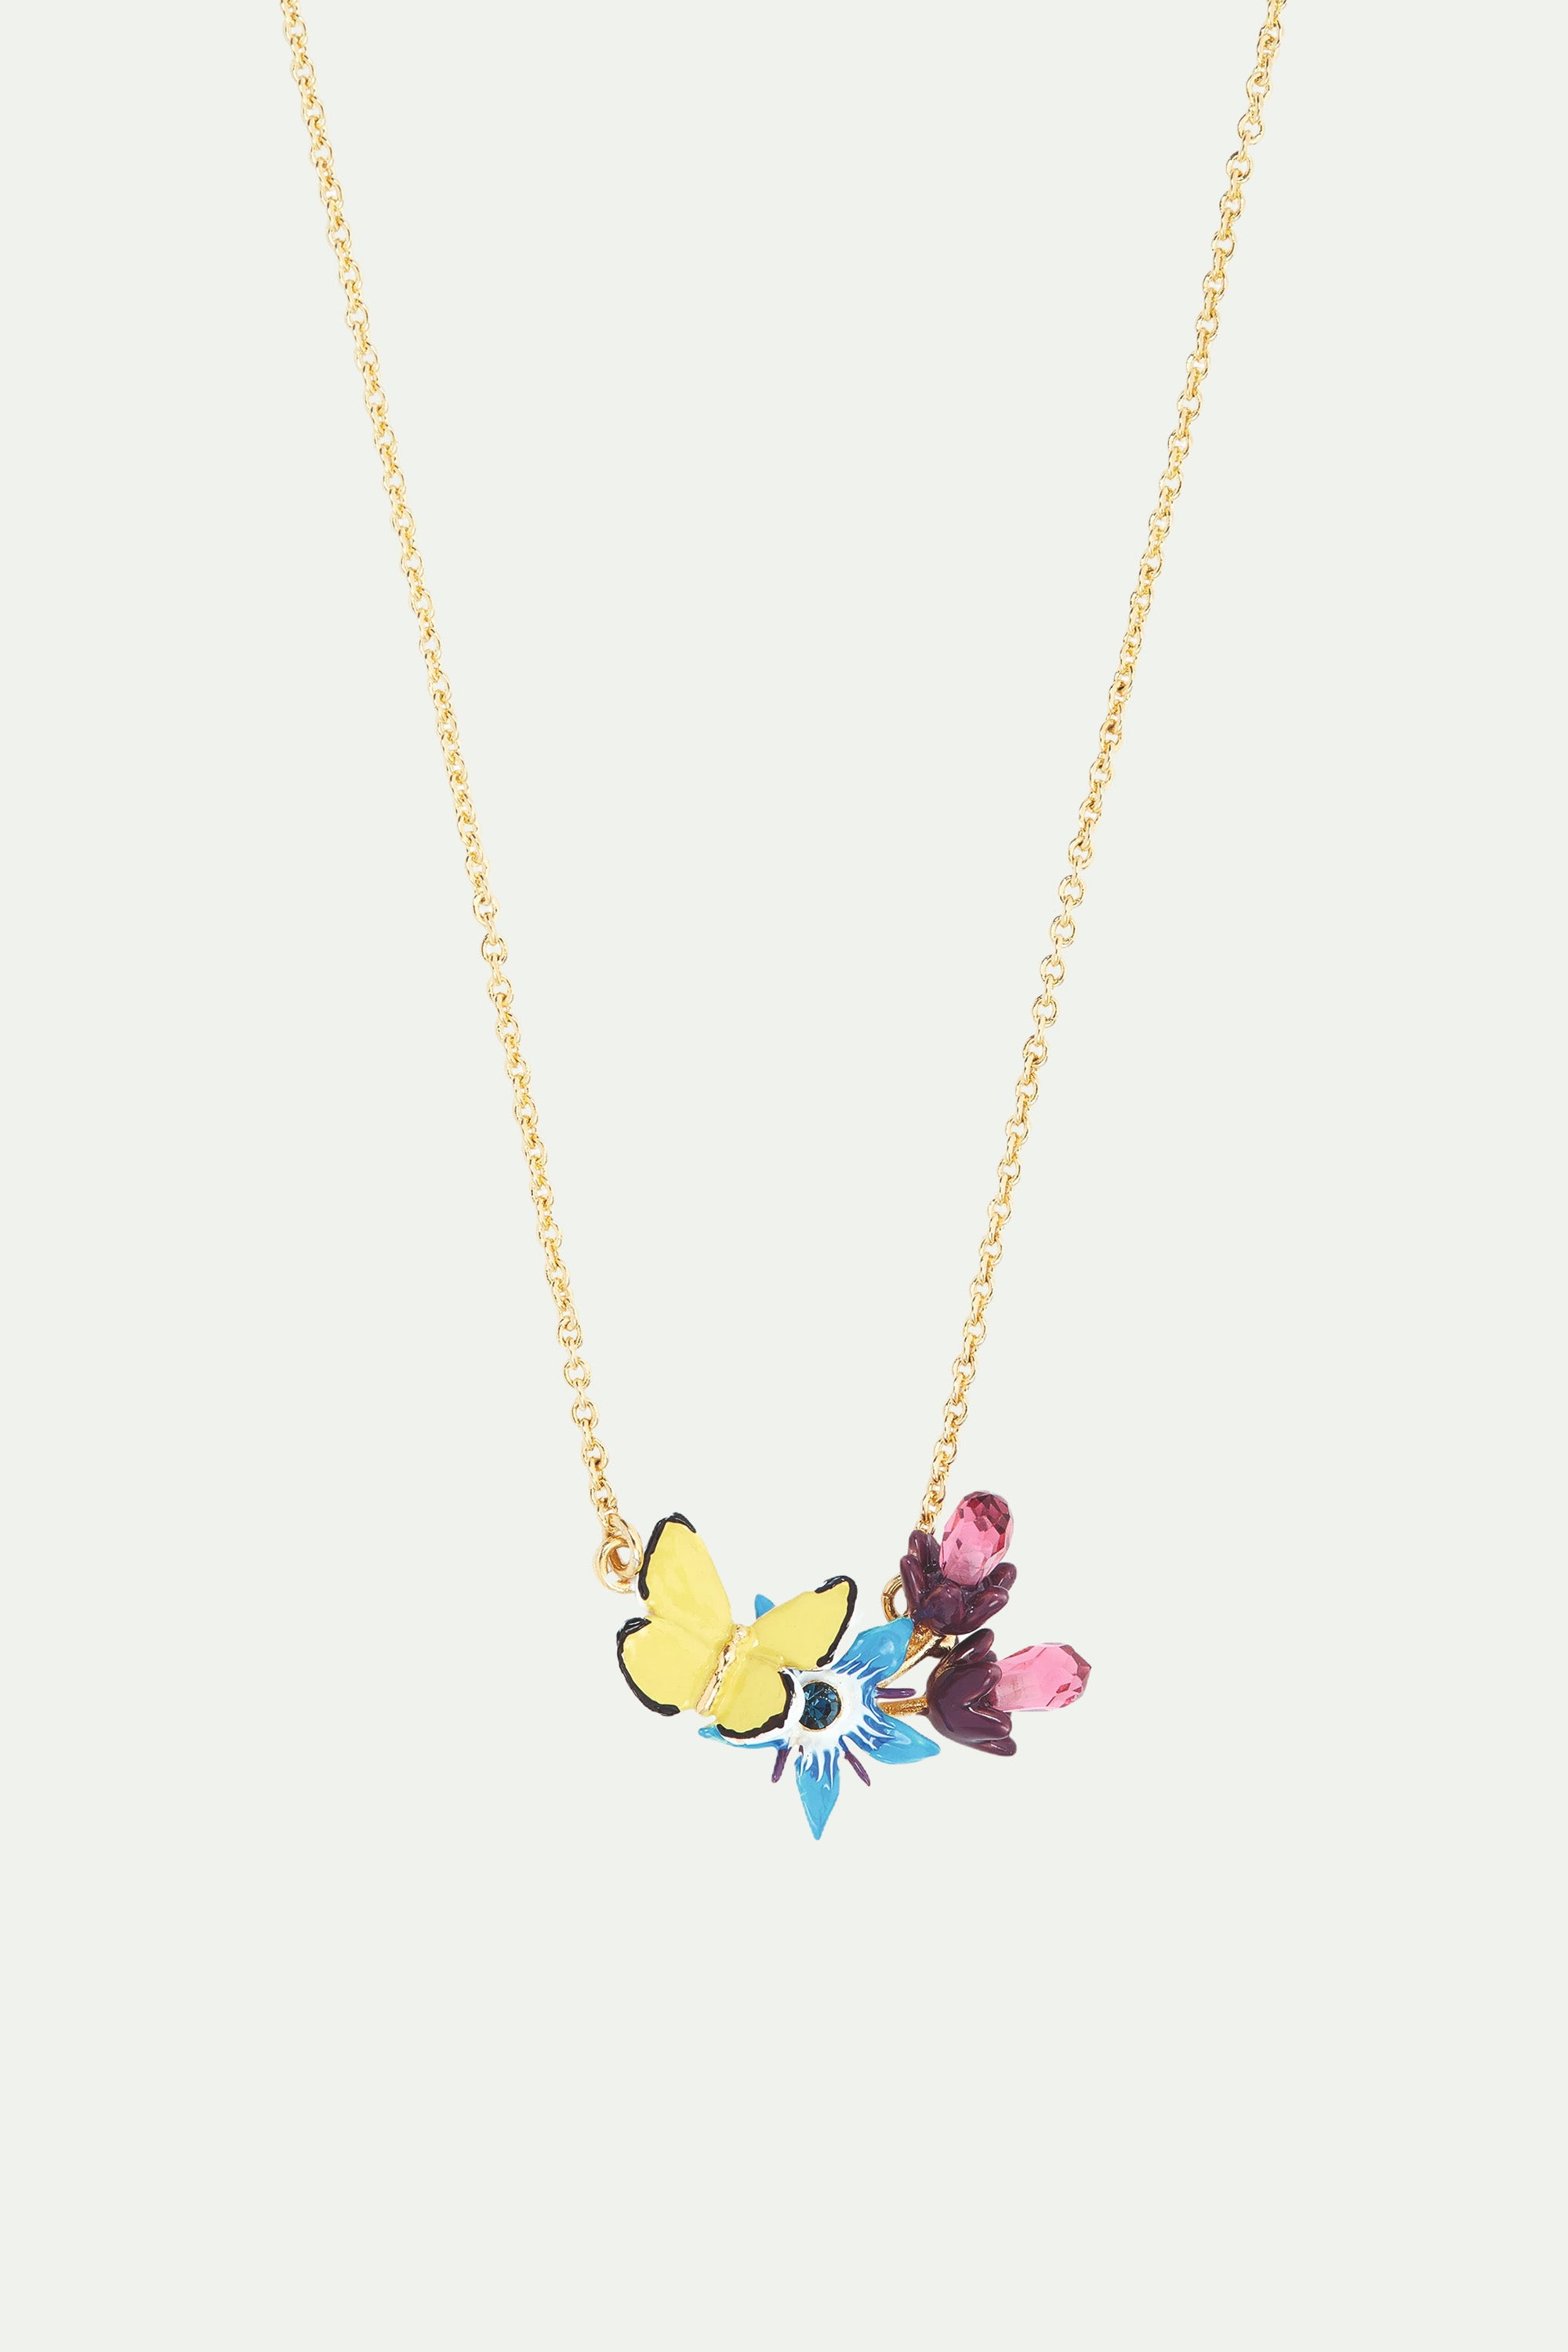 Blue flower and yellow butterfly pendant necklace